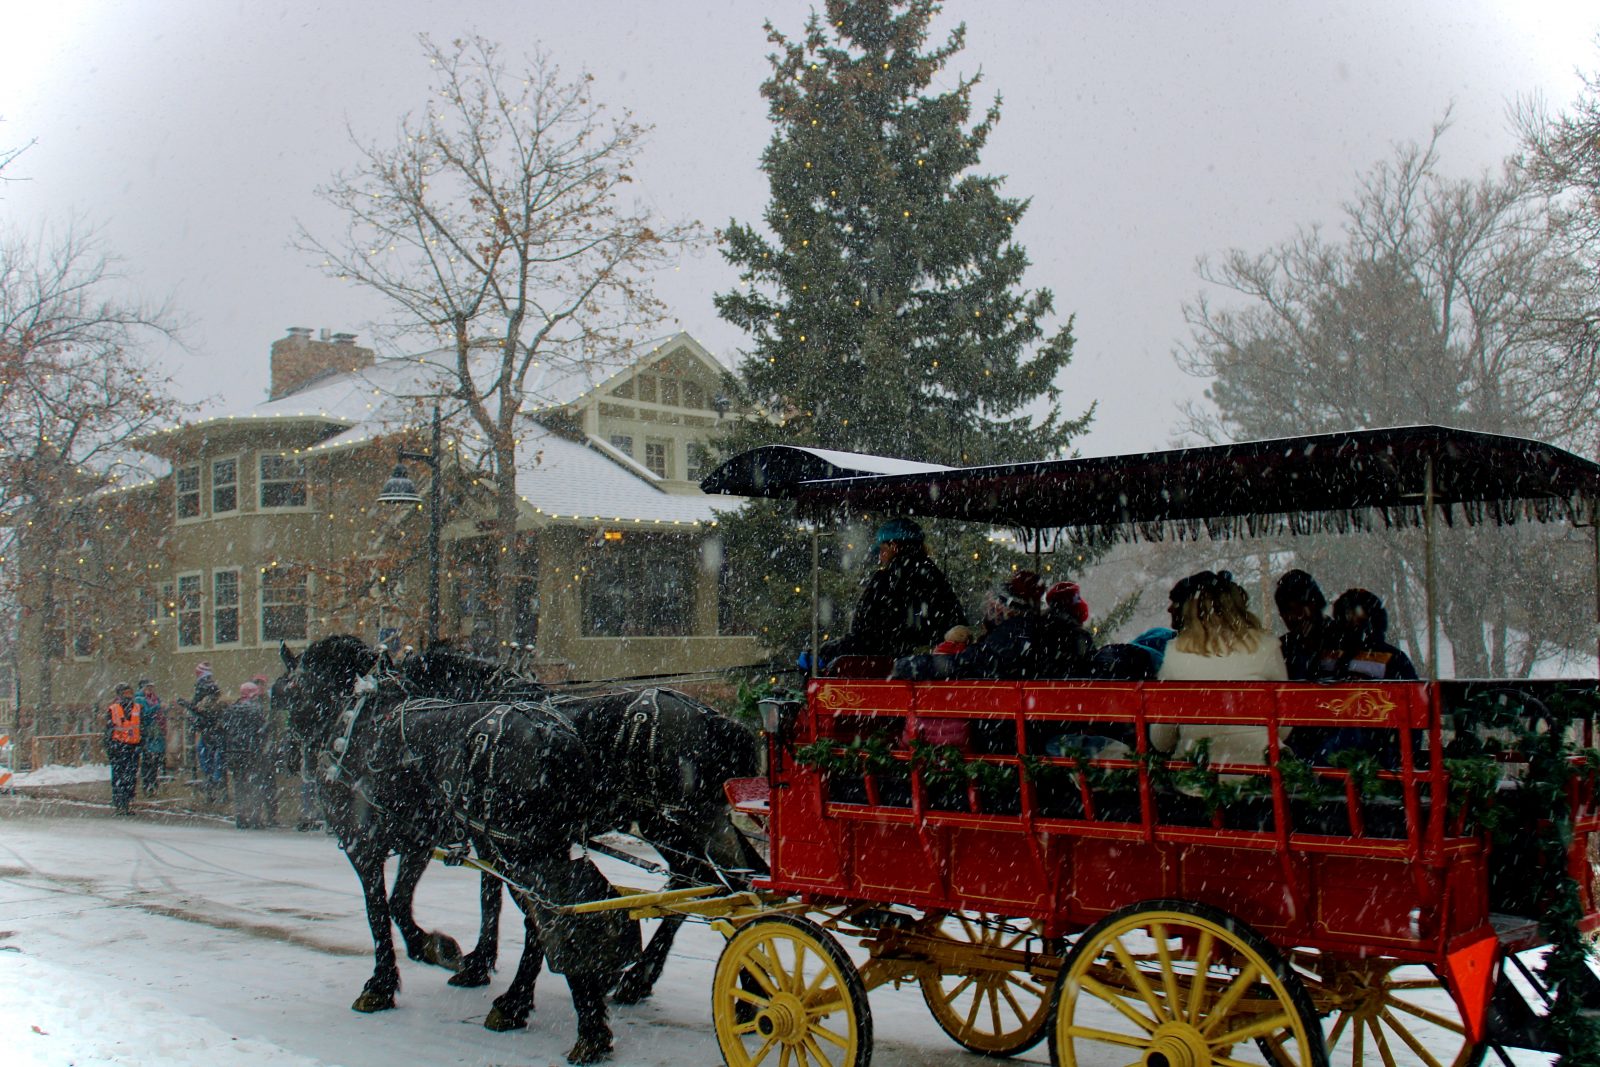 Horse drawn carriage carrying group through the snow